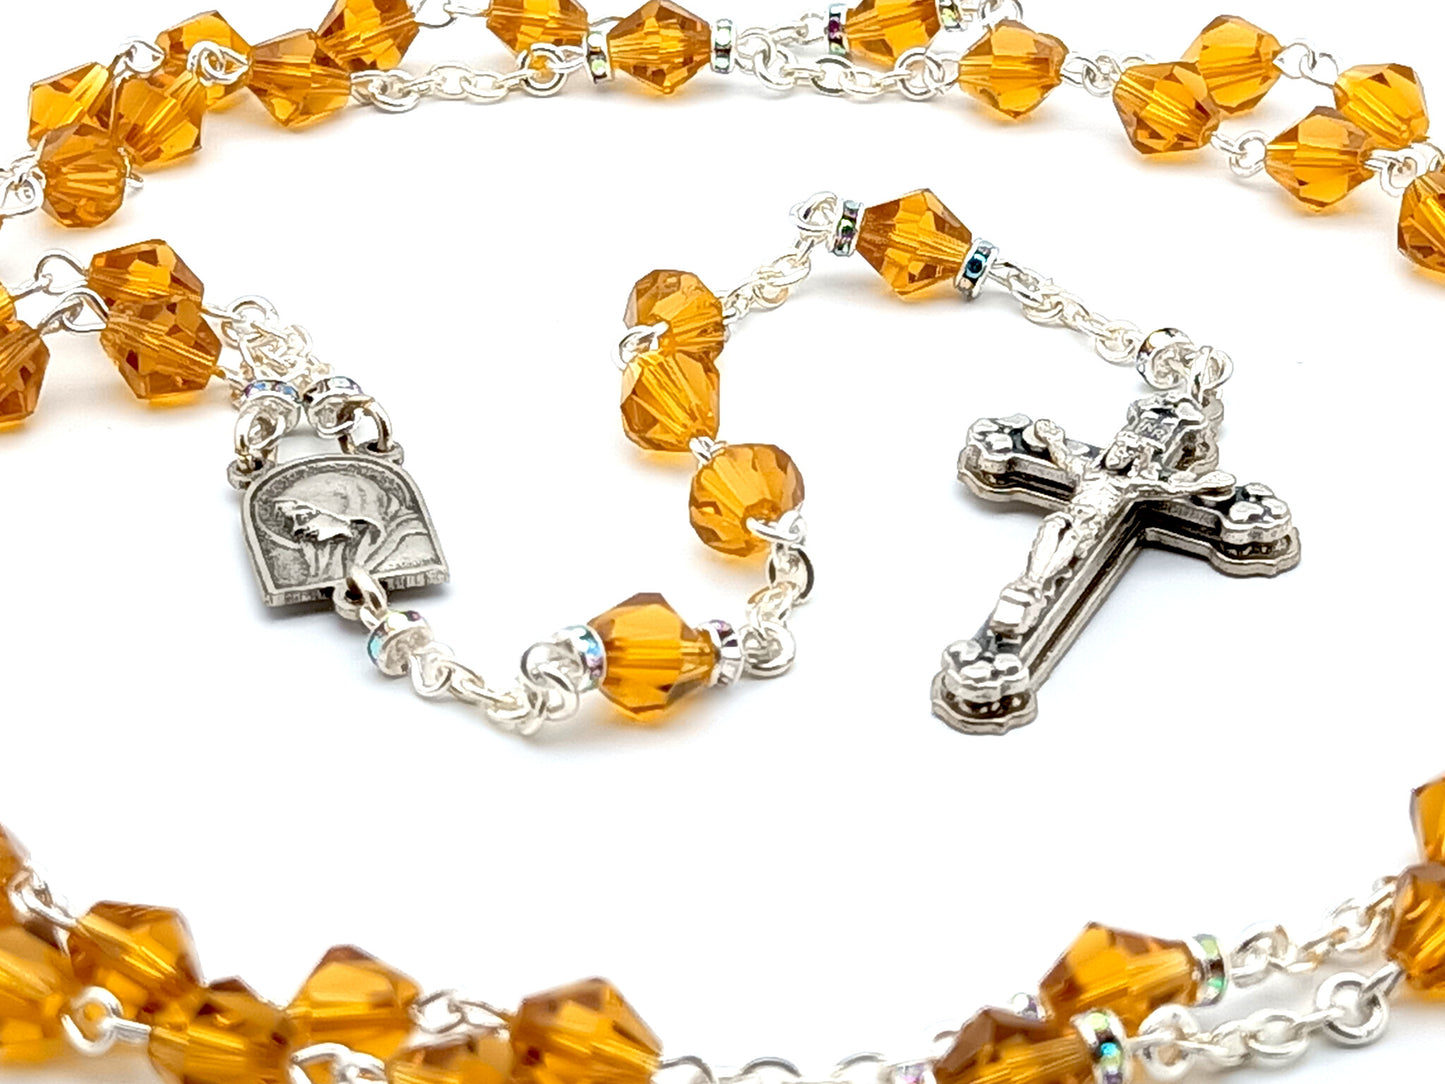 Our Lady of Lourdes and Saint Bernadette amber glass rosary.